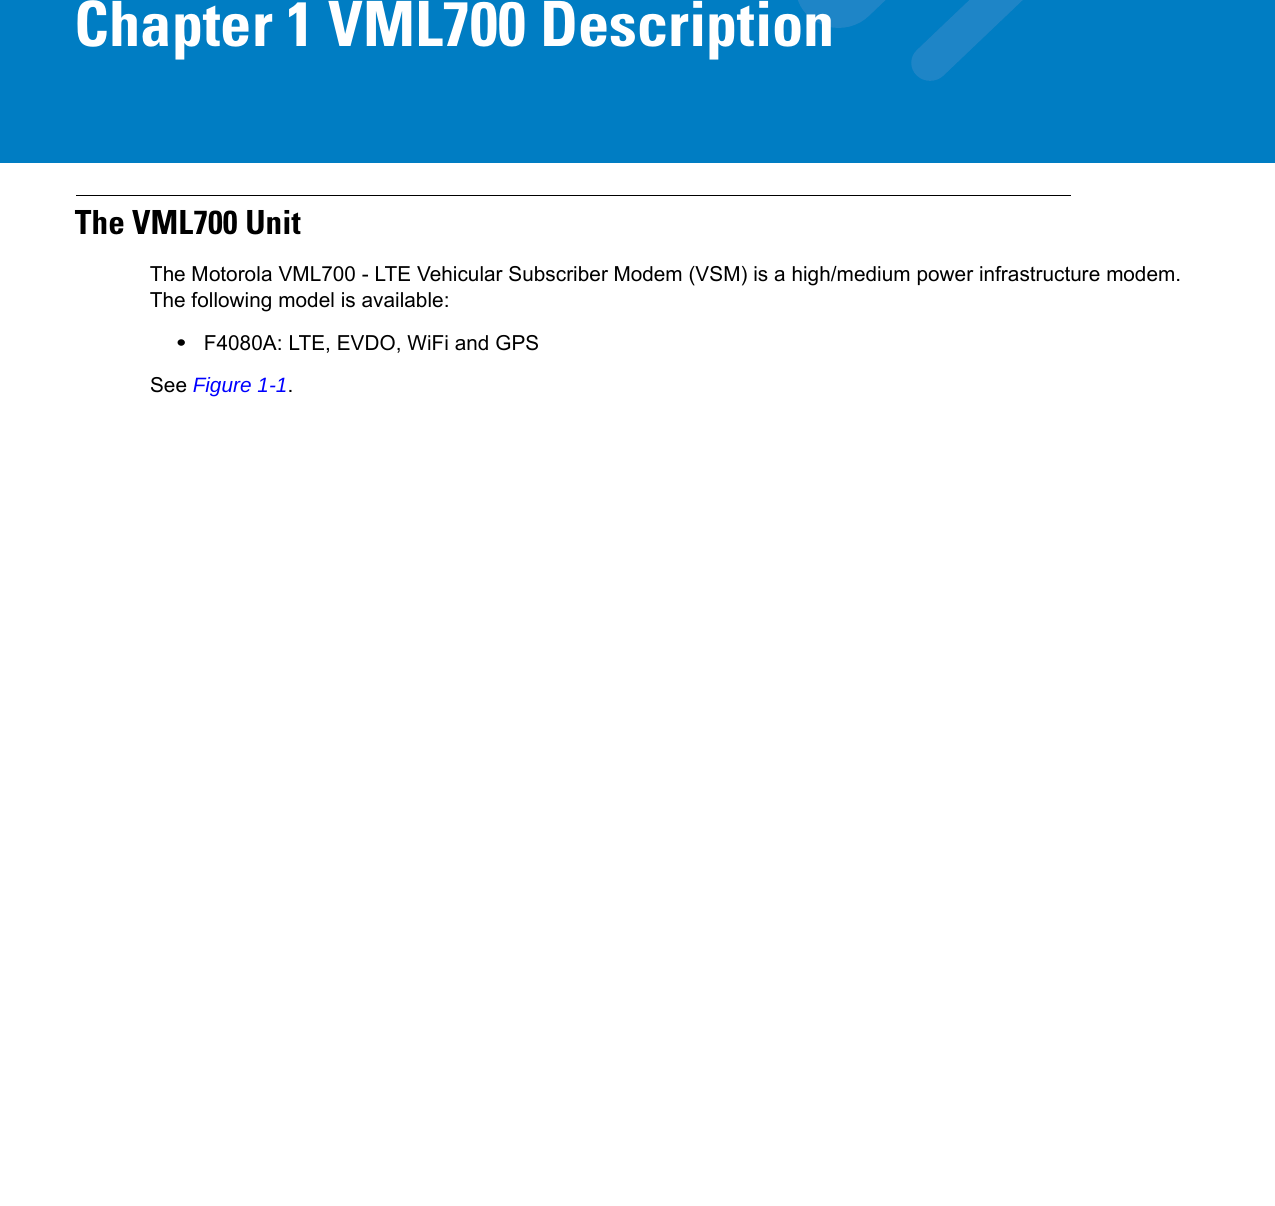 Chapter 1 VML700 DescriptionThe VML700 UnitThe Motorola VML700 - LTE Vehicular Subscriber Modem (VSM) is a high/medium power infrastructure modem. The following model is available:•F4080A: LTE, EVDO, WiFi and GPSSee Figure 1-1.